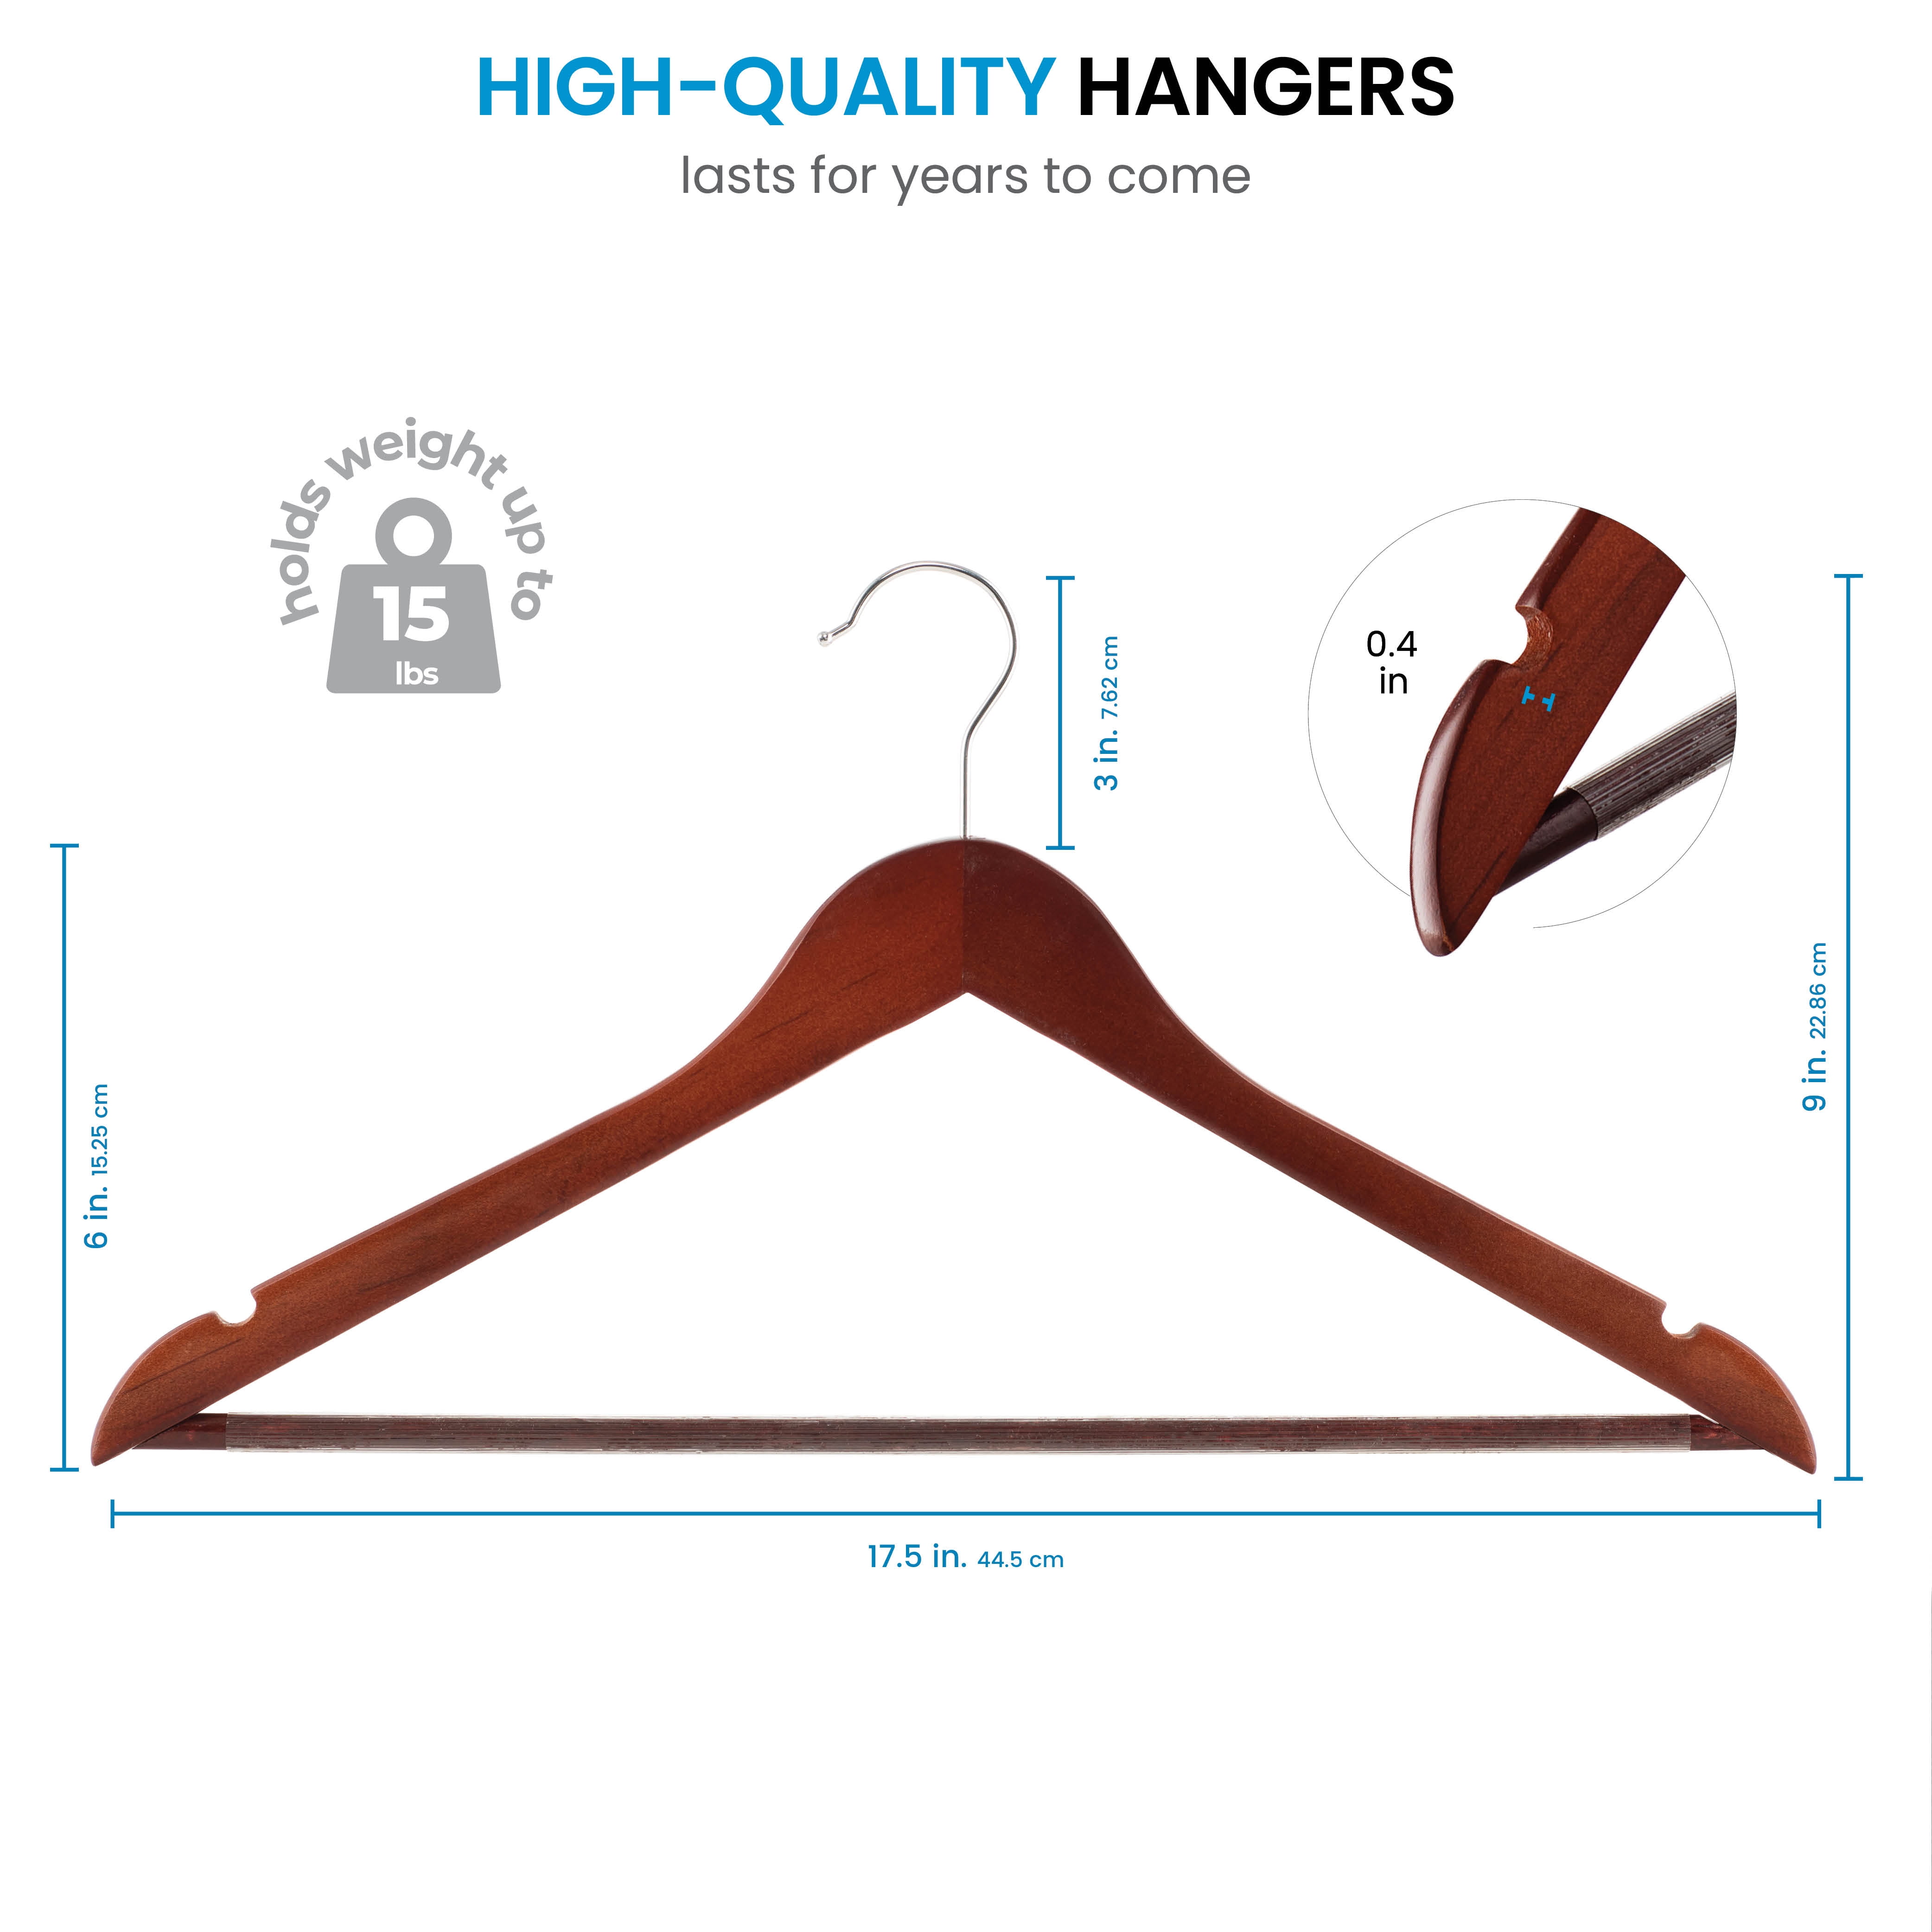  HOUSE DAY Wide Shoulder Wooden Hangers, Suit Hangers with Non  Slip Pants Bar, Smooth Finish 360° Swivel Hook Solid Wood Coat Hangers for  Dress, Jacket, Pants, Heavy Clothes Hangers 6 Pack (